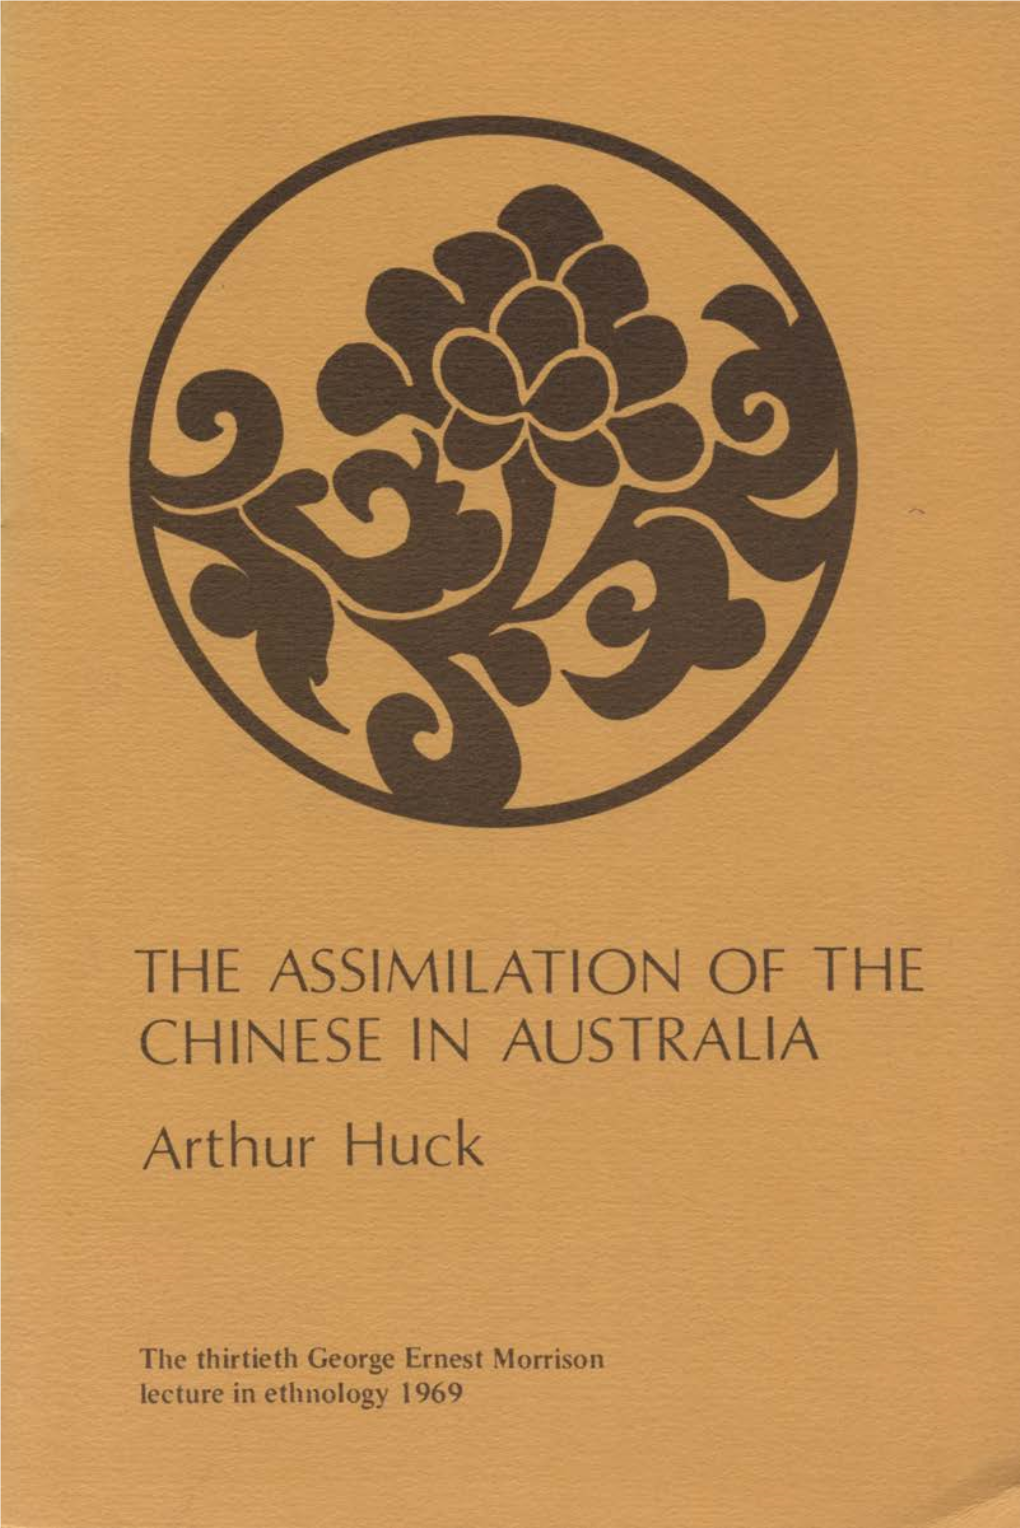 THE ASSIMILATION of the CHINESE in AUSTRALIA Arthur Huck